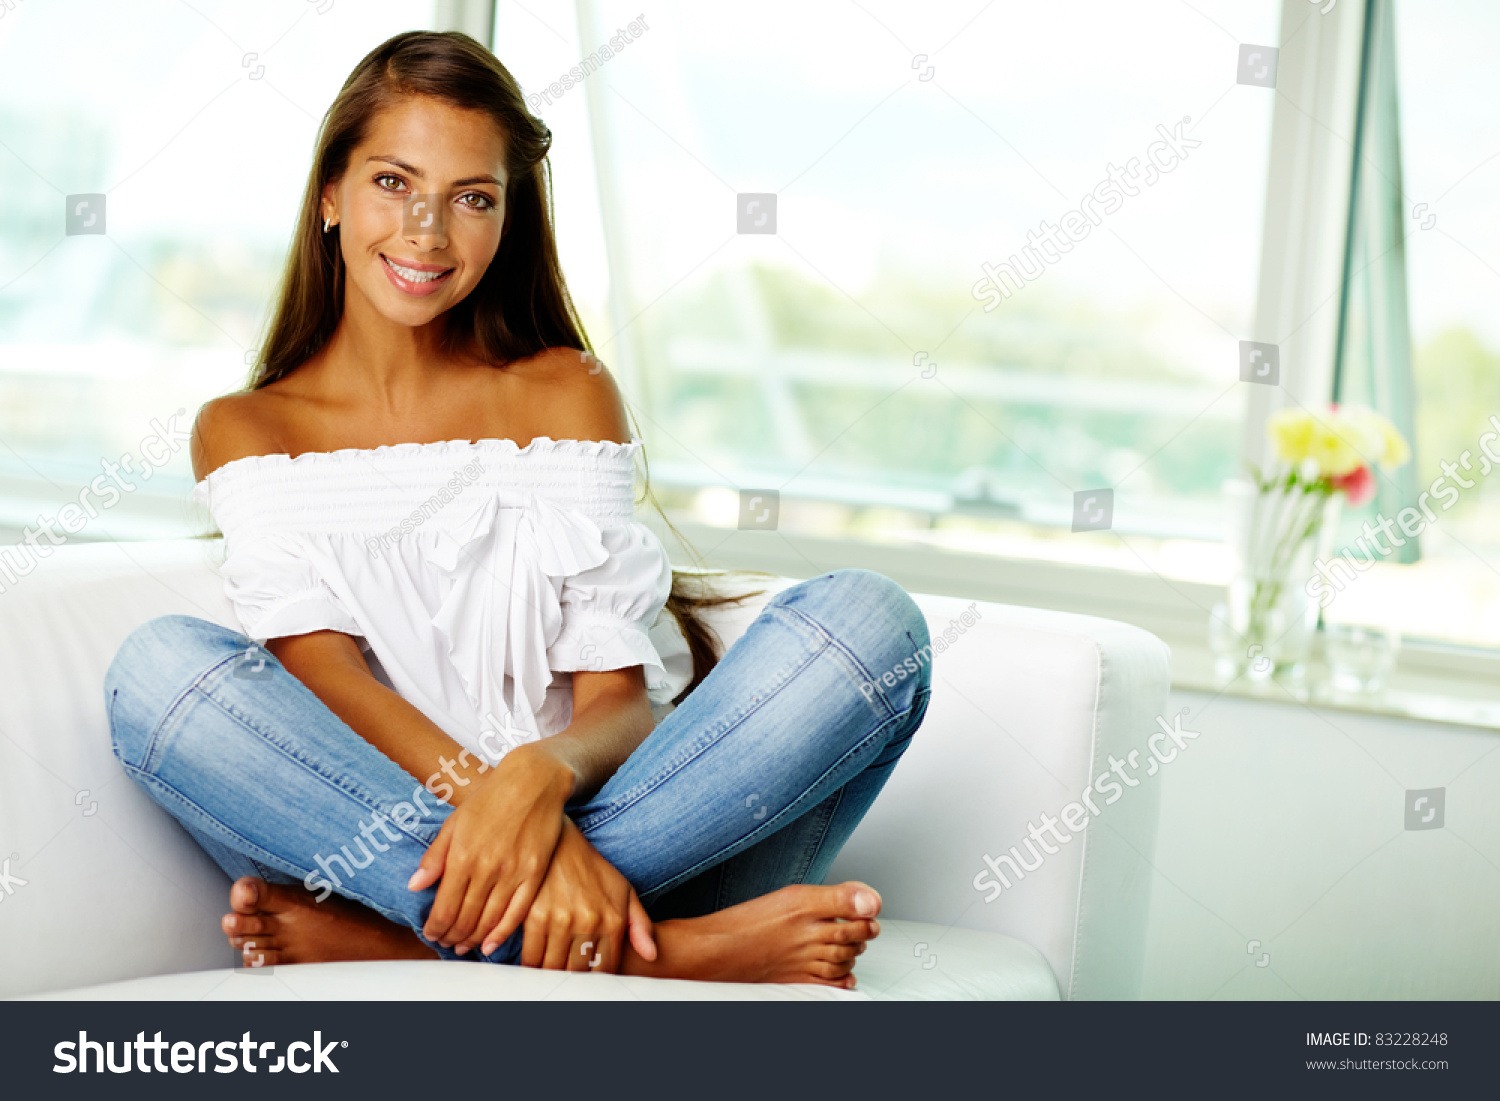 Portrait of cute brunette sitting on sofa at home #83228248